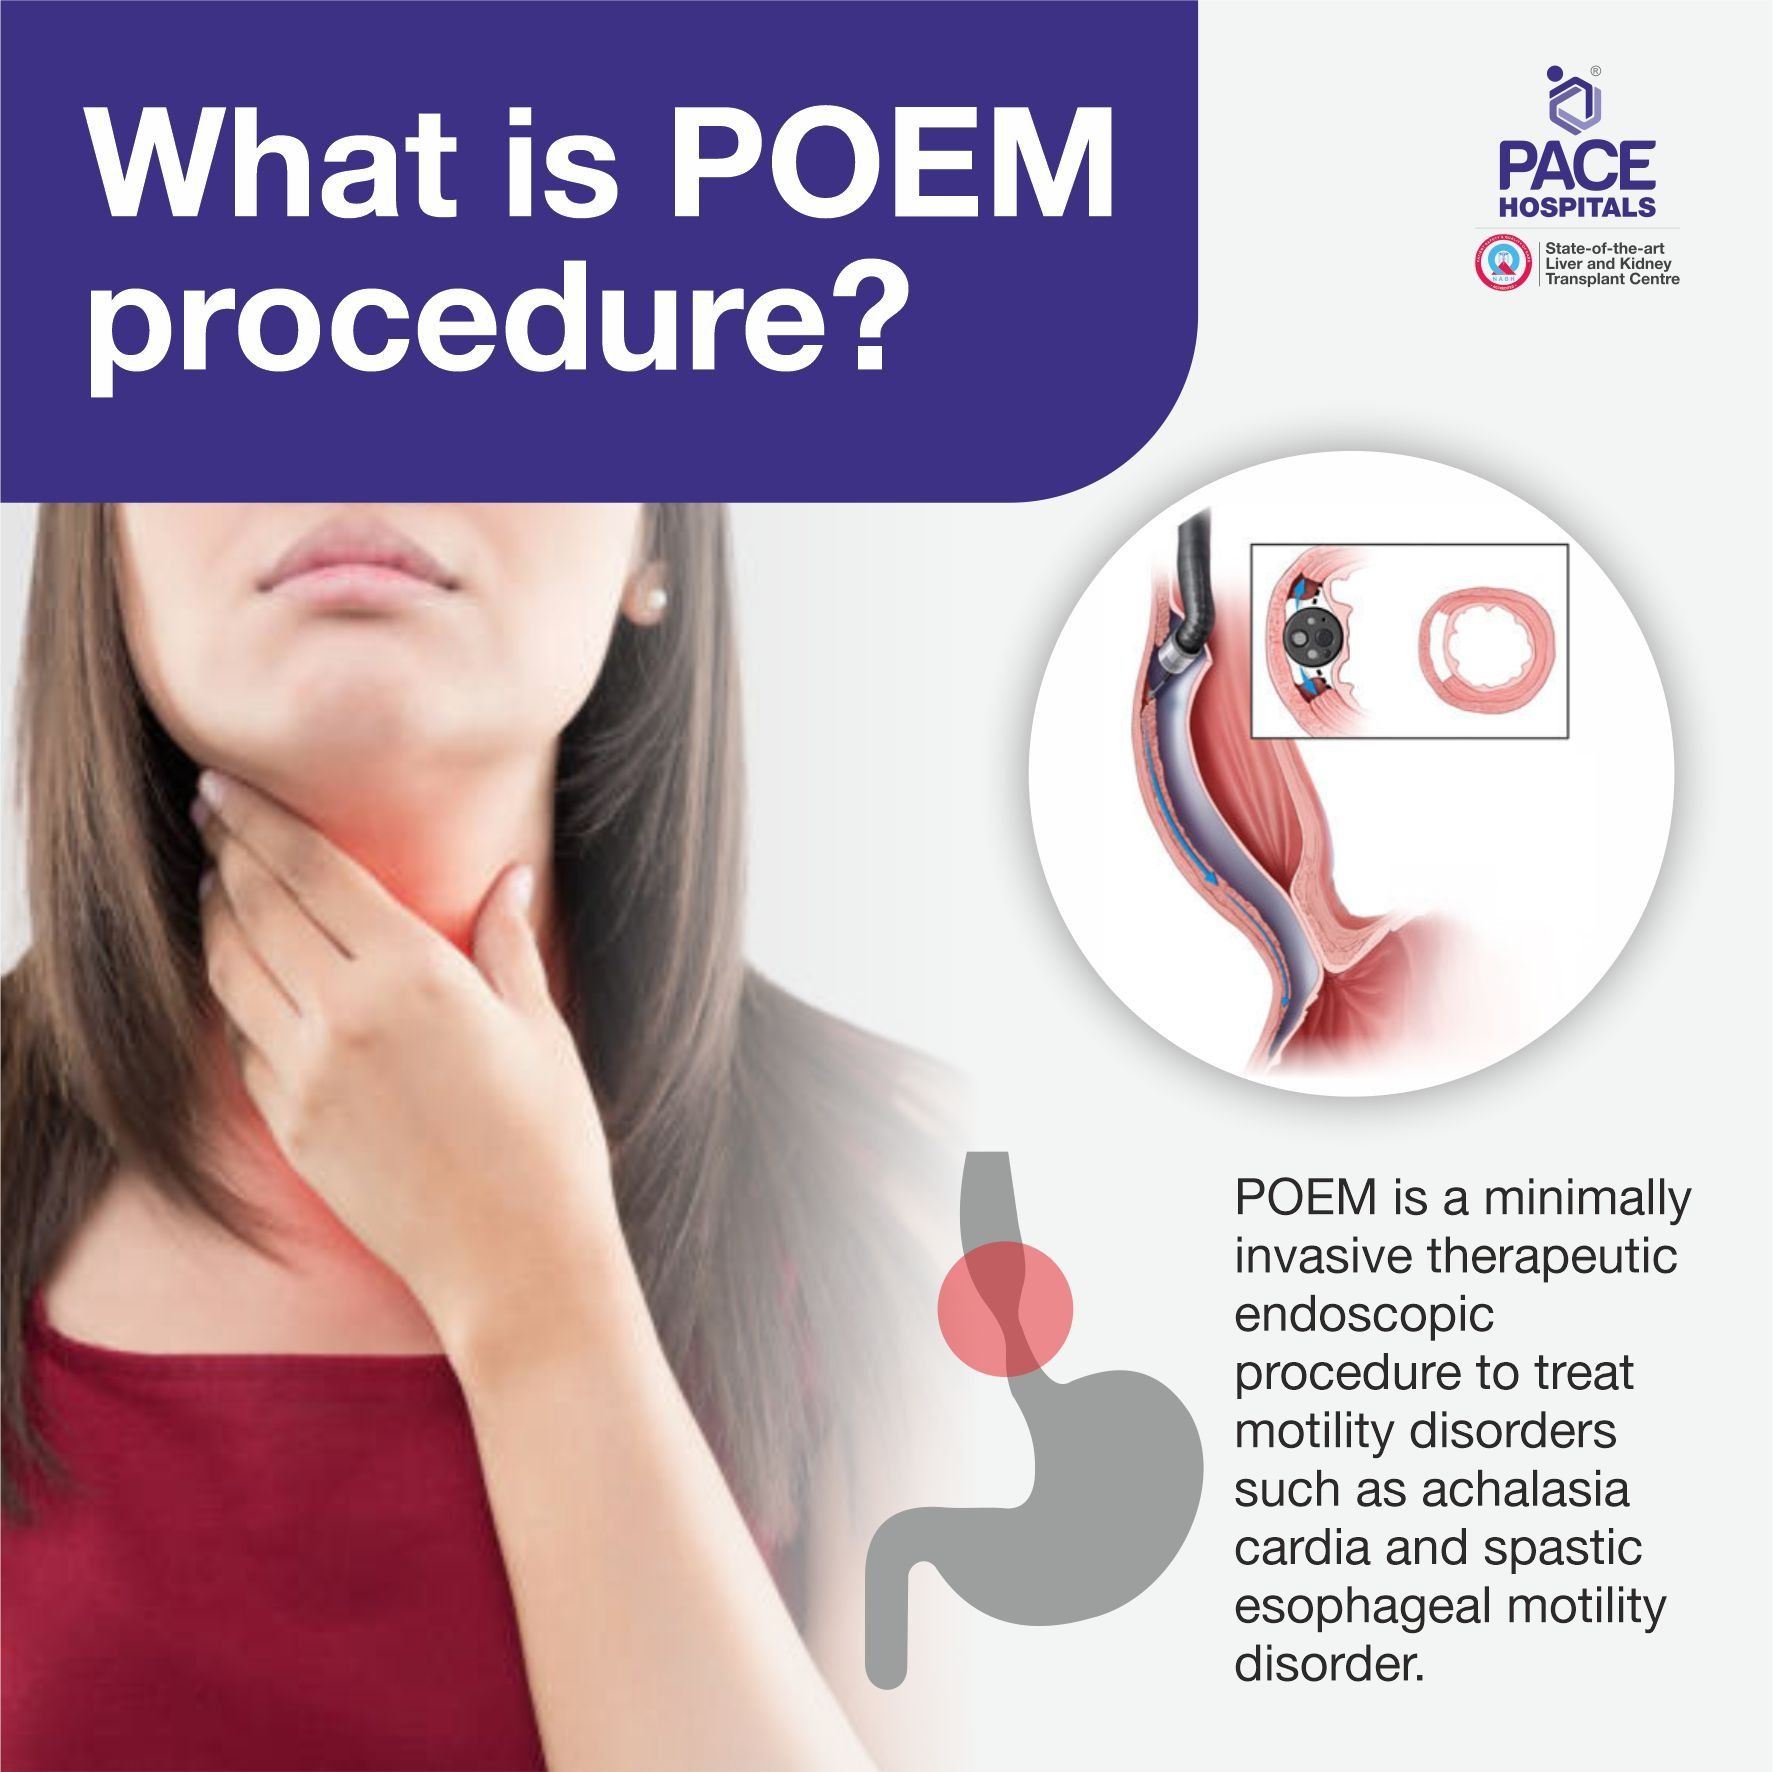 What is POEM for achalasia cardia